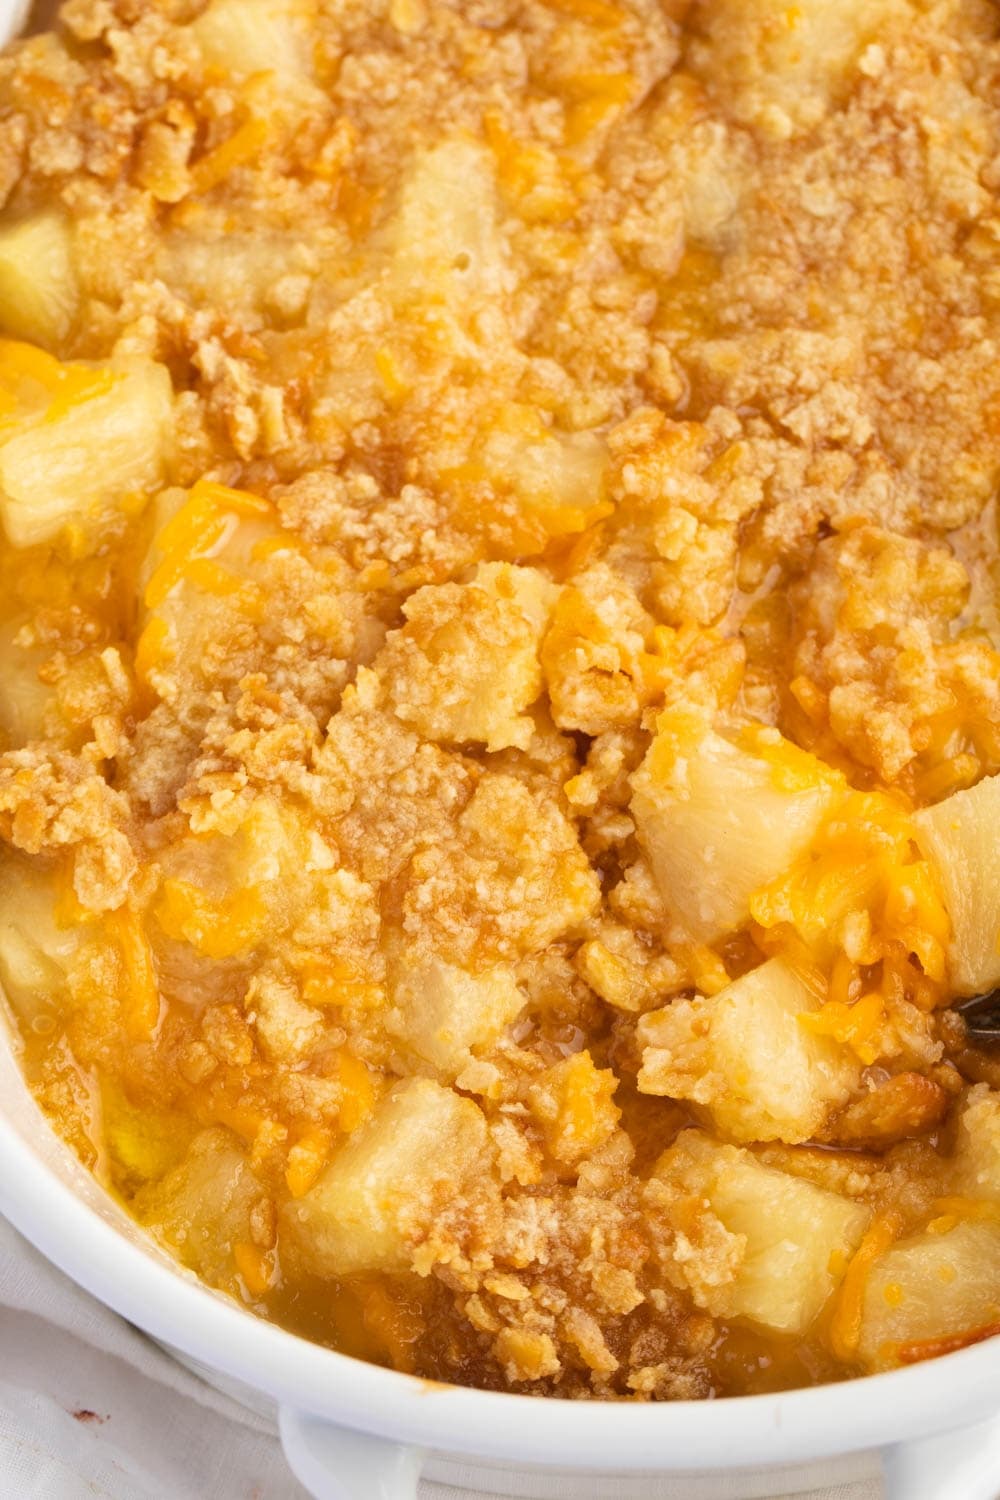 Homemade Pineapple Casserole with Shredded Cheese